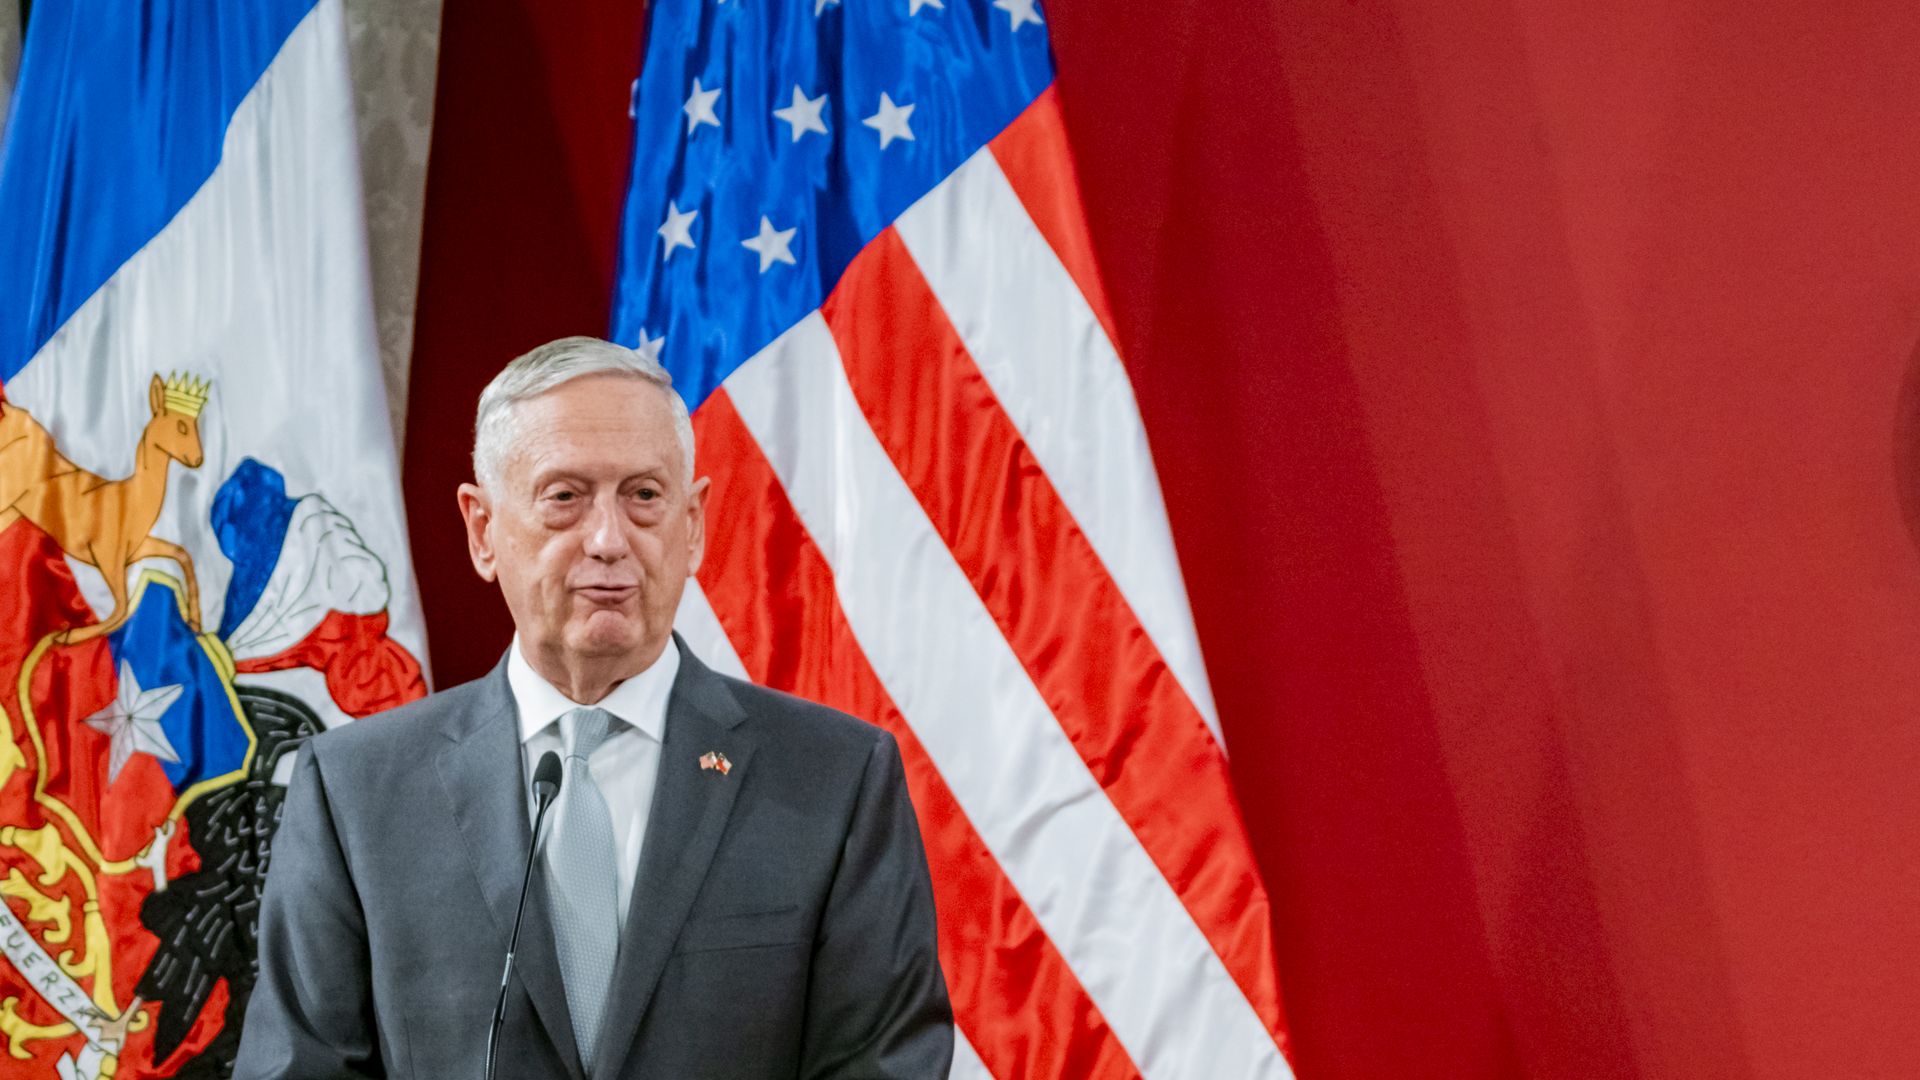 Jim Mattis purses his lips standing before a red background and two flags